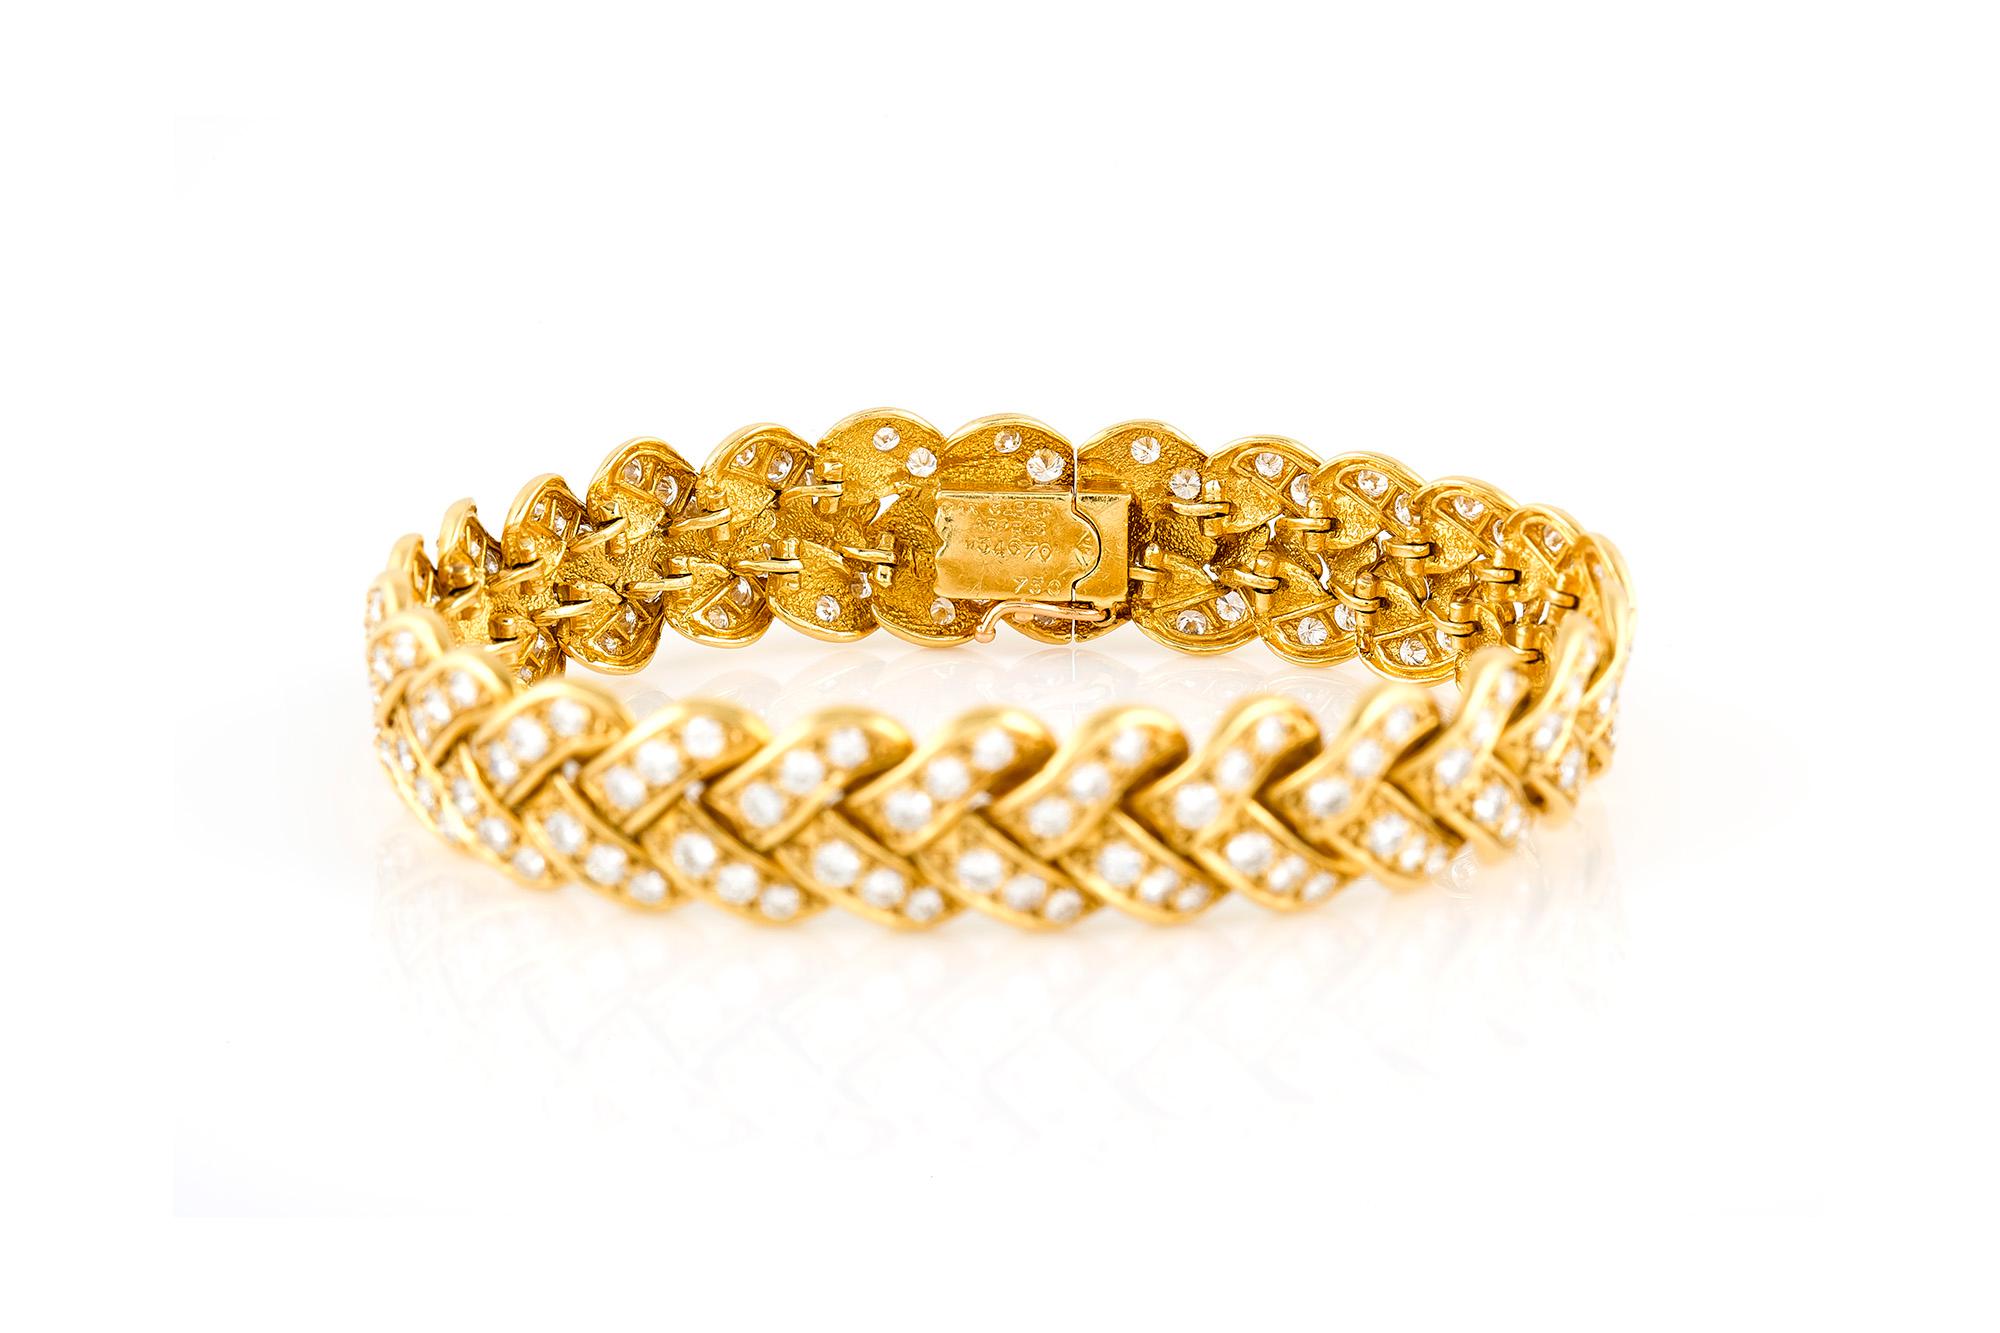 Bracelet, finely crafted in 18 k yellow gold with Round Brilliant cut diamonds. Signed and numbered by Van Cleef & Arpels. 6 5/8'' long and 0.5'' wide.